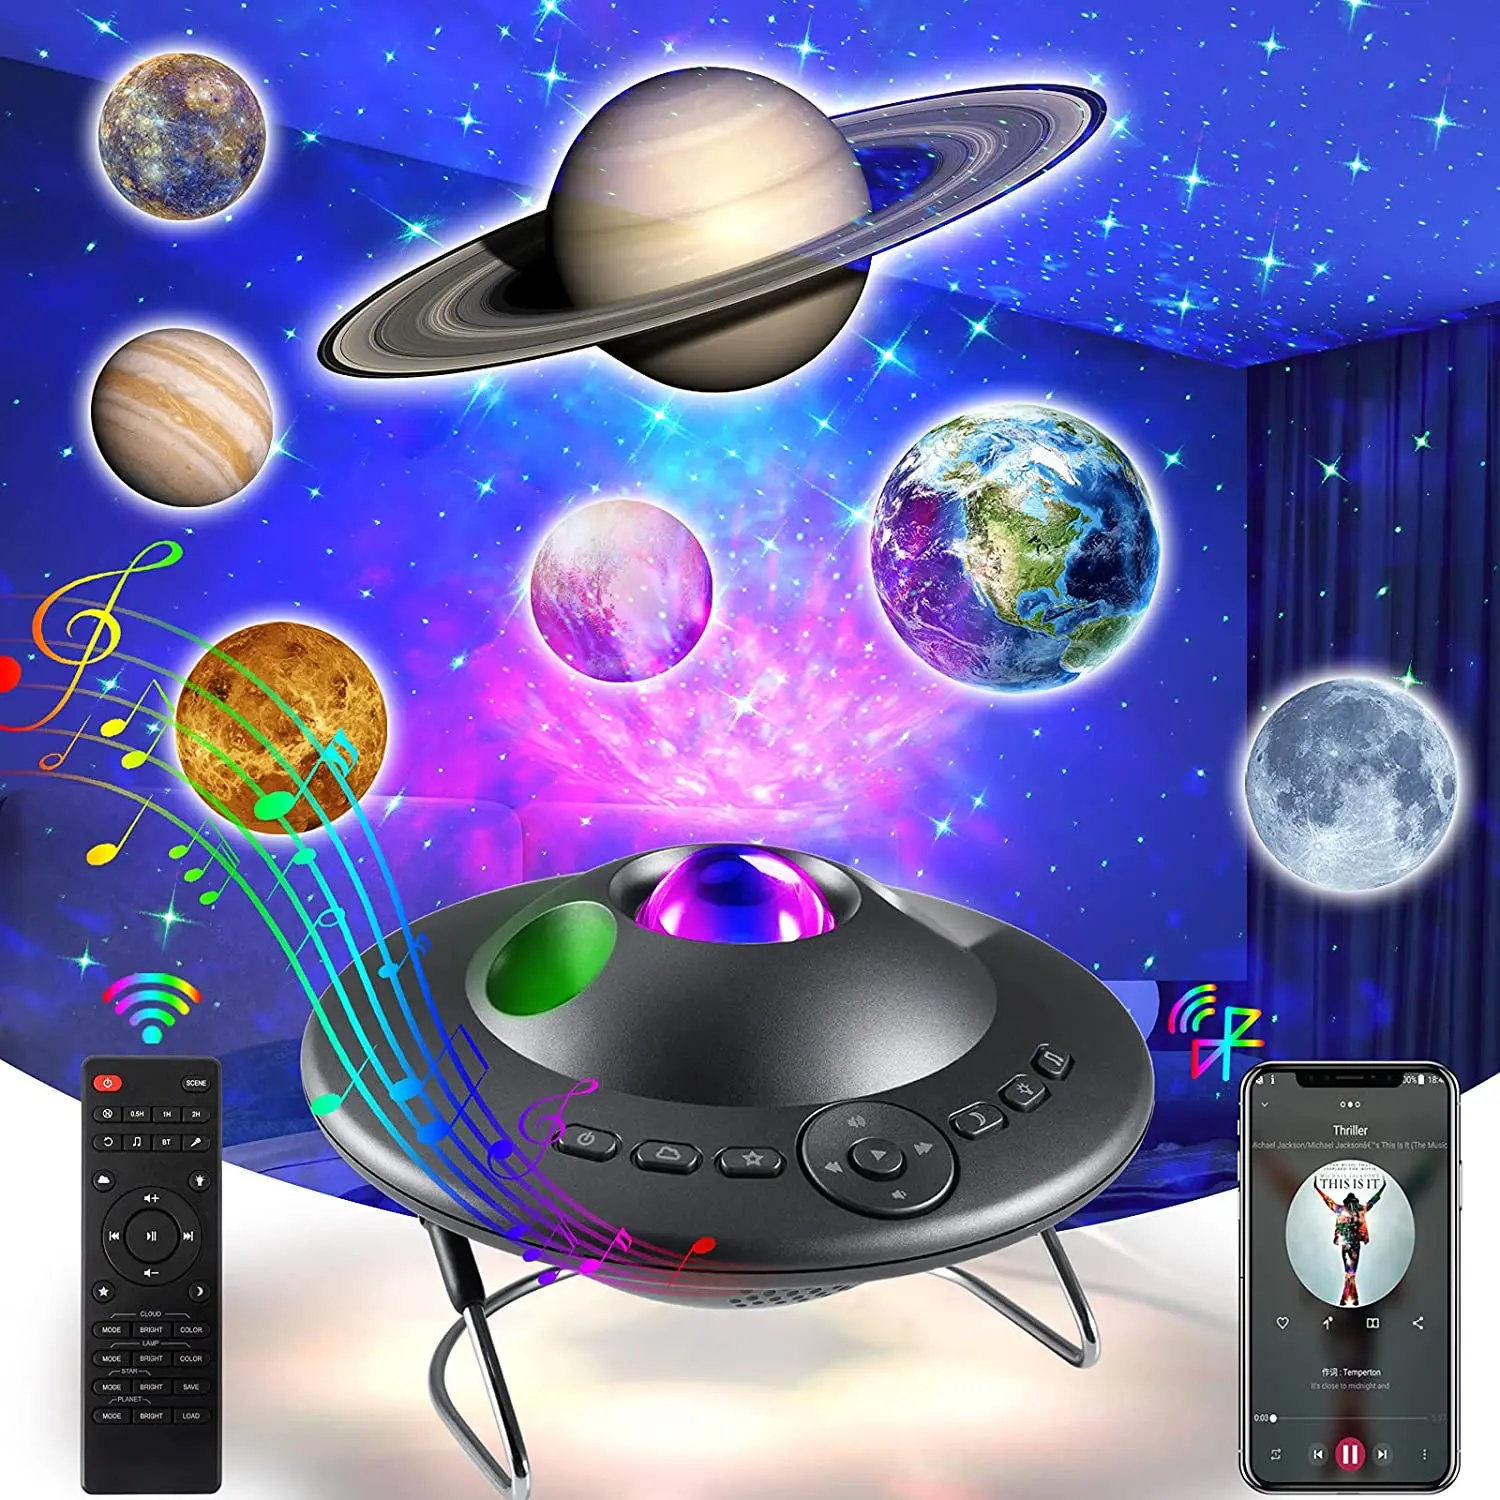 Colorful Starry Sky Projector LED Star Galaxy Night Light UFO Planet Bluetooth-Speaker For Bedroom Game Room  With White Noise